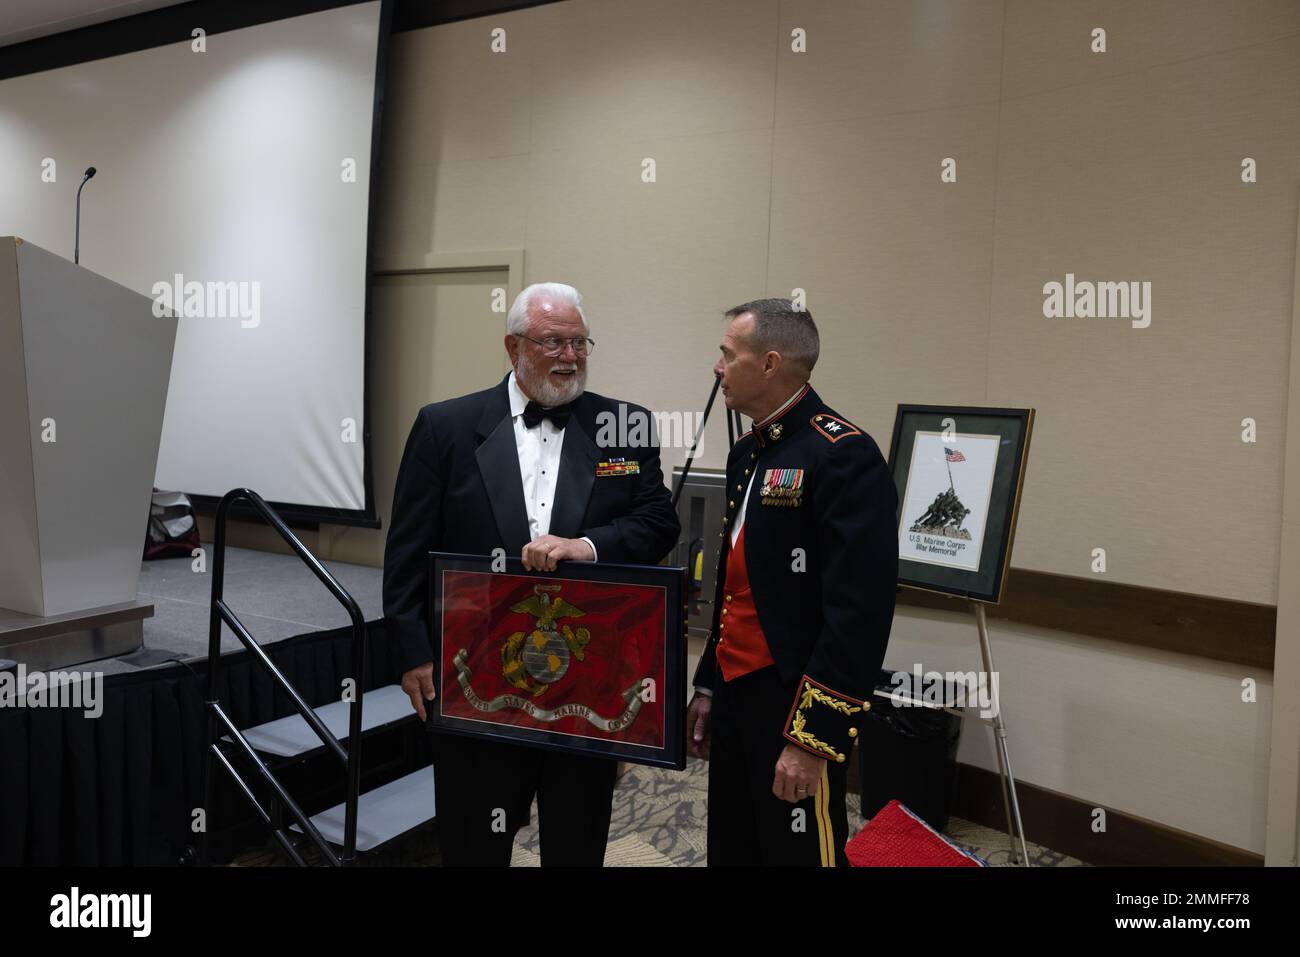 U.S. Marine Corps Maj. General Jay Bargeron, 3d Marine Division Commanding General, speaks with a veteran of “The Fighting Third”  at the 3d Marine Division Association banquet honoring the Division’s 80th Anniversary in San Diego, California, Sept. 17, 2022. The 3d Marine Division was activated at Camp Elliot, San Diego, Sept. 16, 1942 and has taken part in combat operations from World War II and Vietnam through Iraq and Afghanistan. The current Marines of 3d Marine Division continue to build on this legacy today as a critical part of the stand-in force within the first island chain of the In Stock Photo